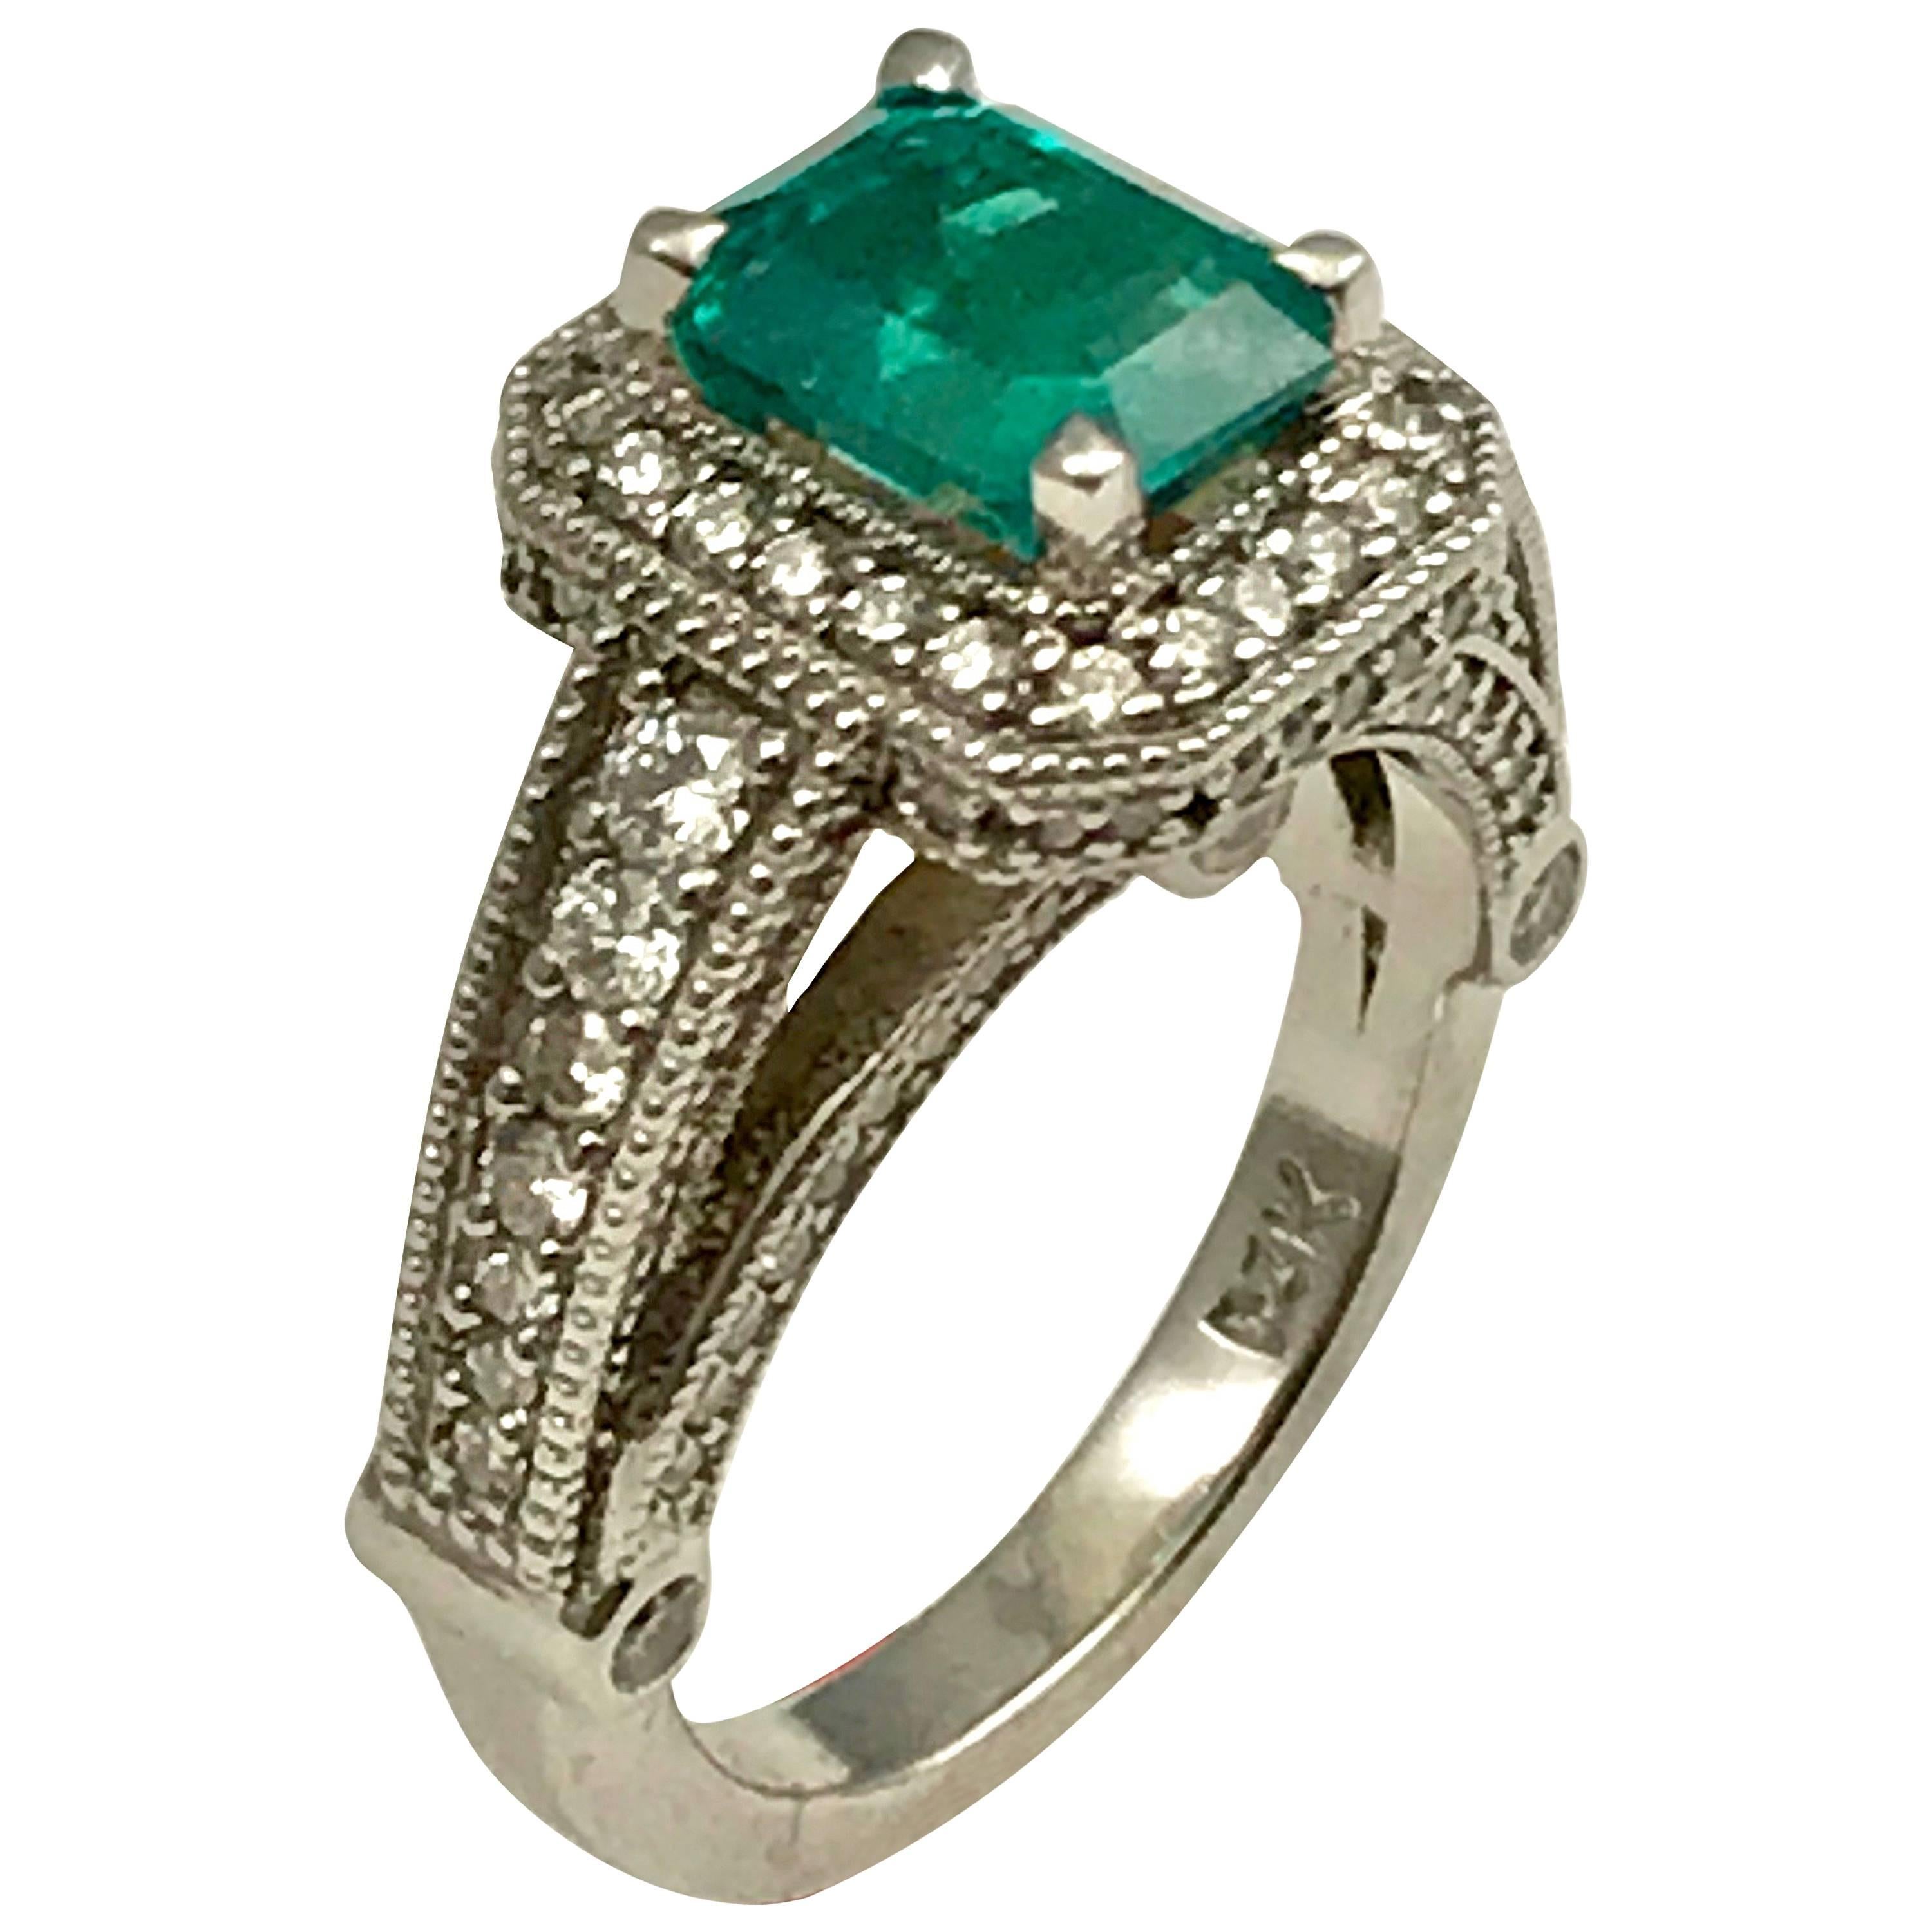 1.56 Carat Colombian Emerald Cocktail Ring Set in 14 Karat White Gold For Sale